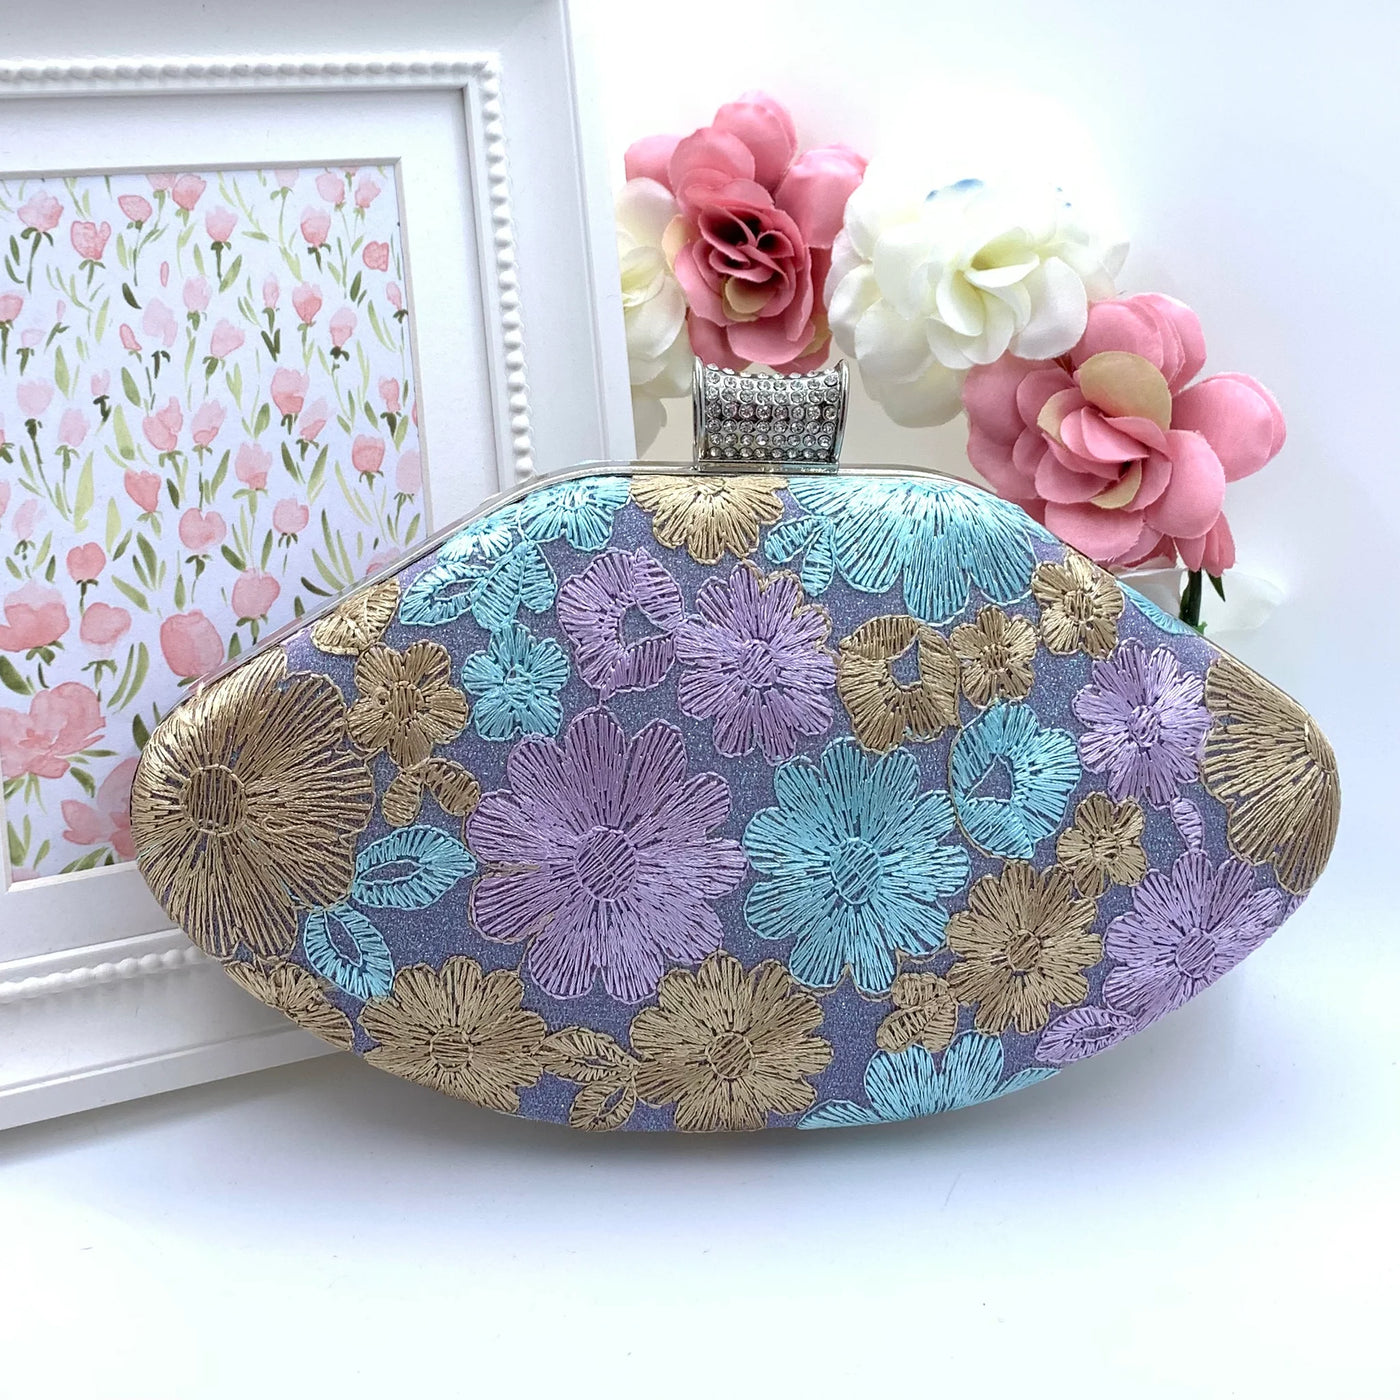 Lace embroidered case bag